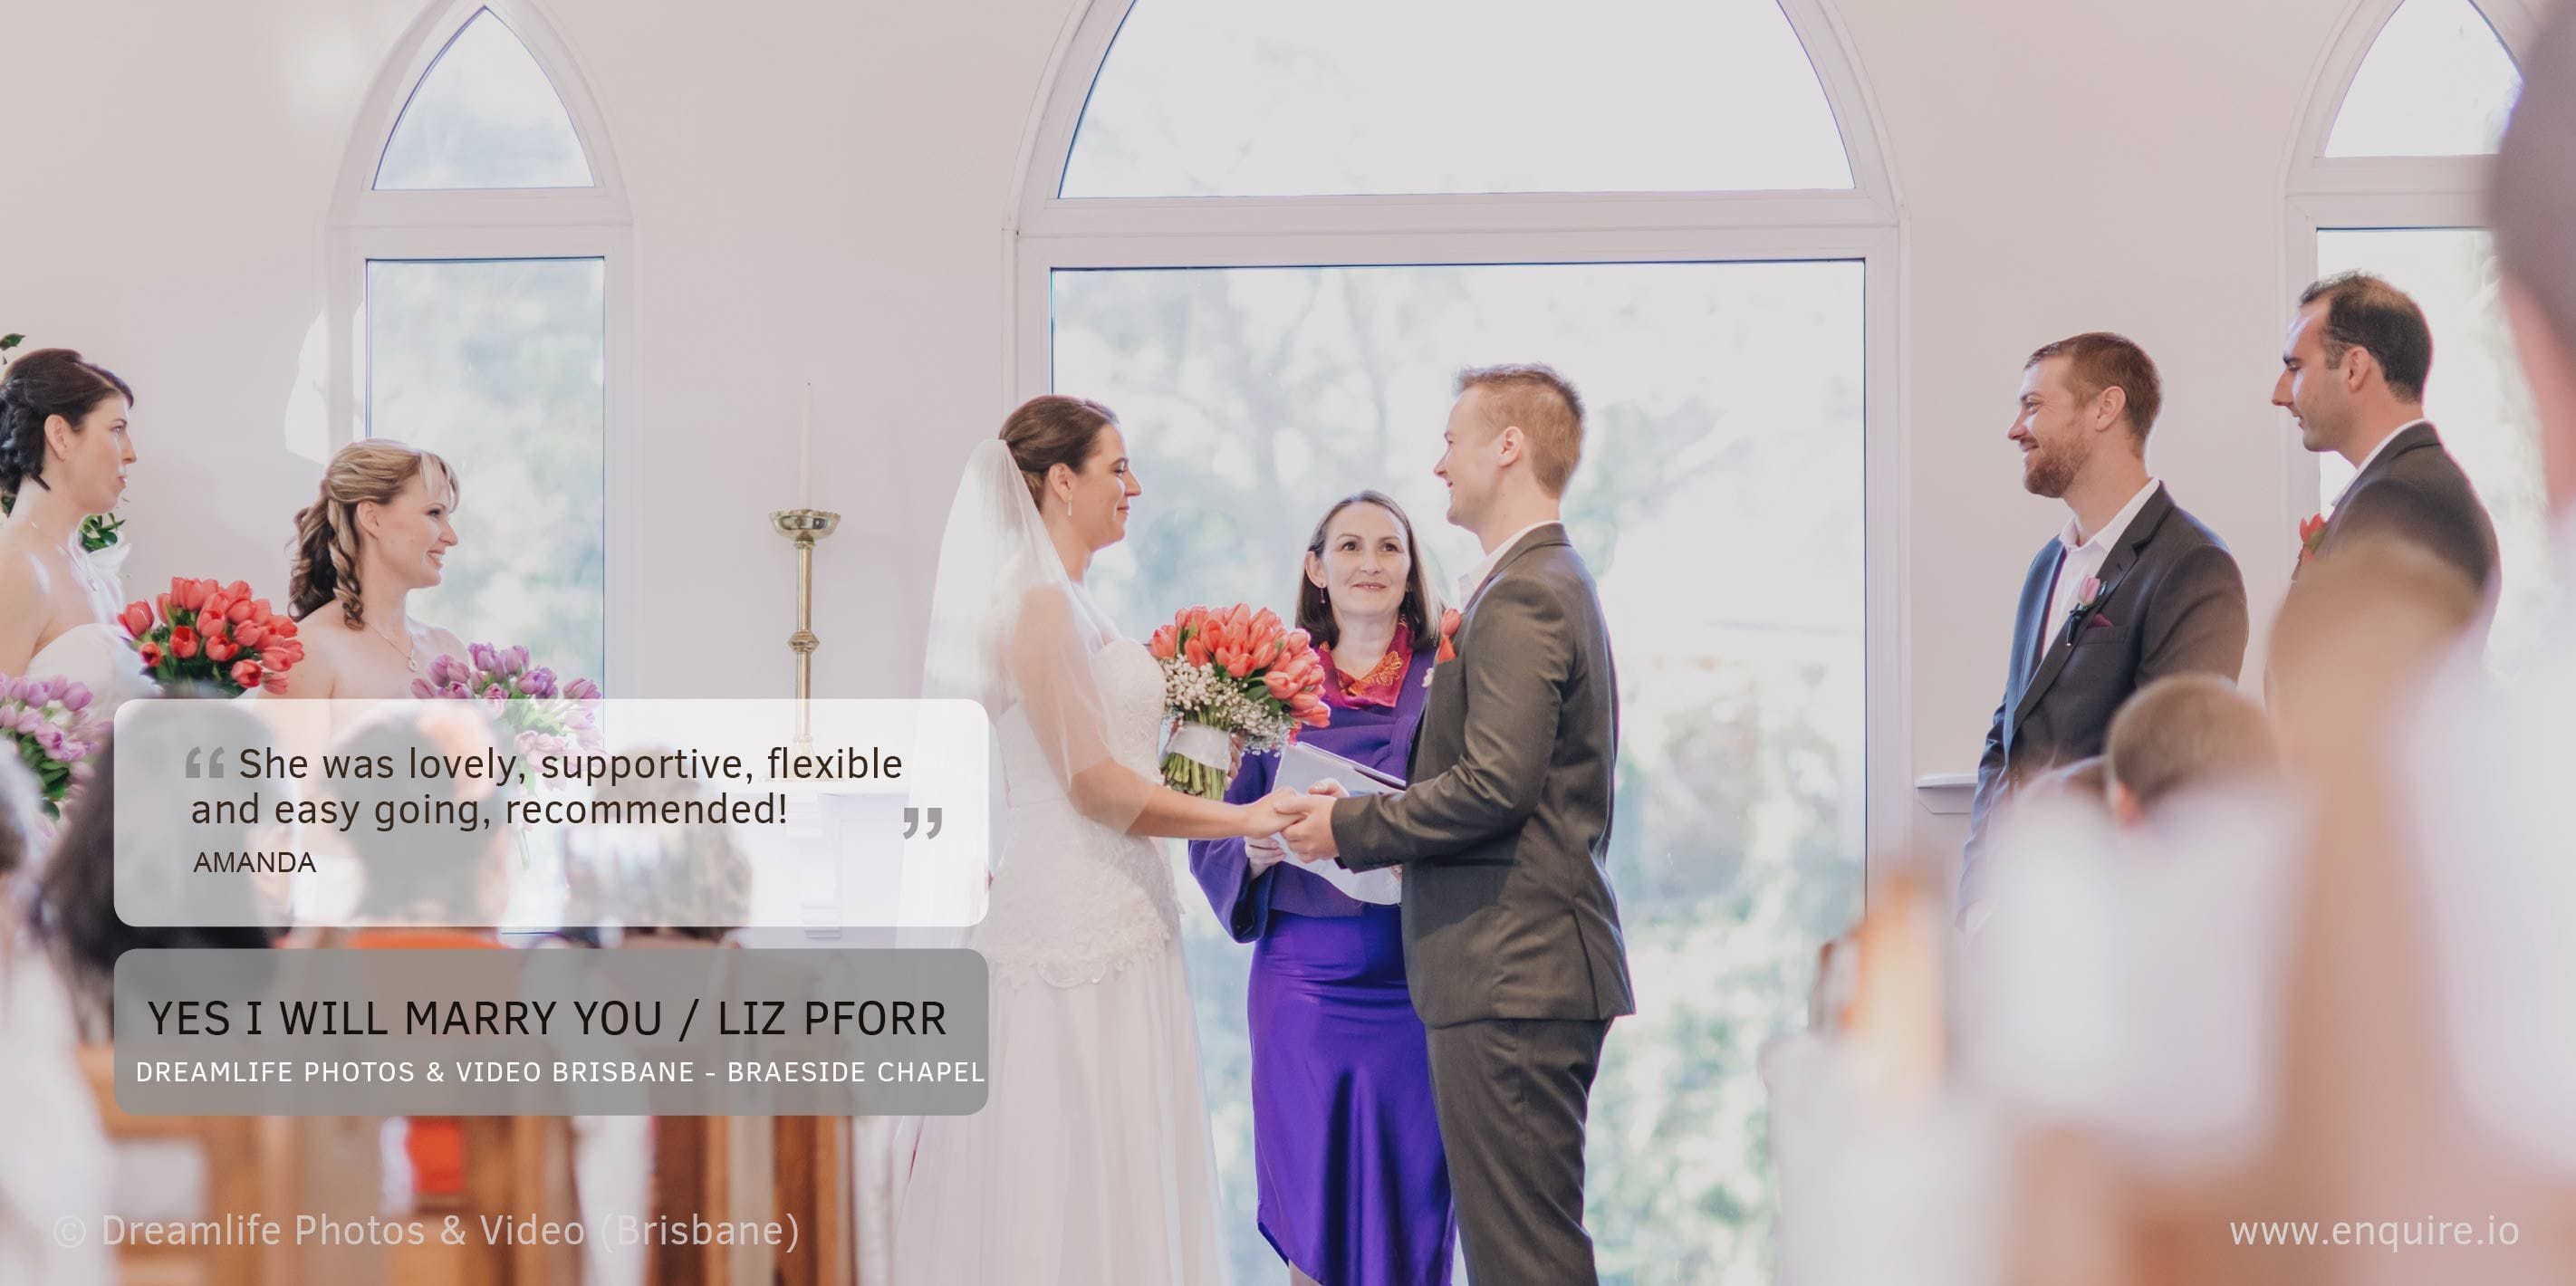 Testimonials and recommendations for Gold Coast Marriage Celebrant Liz Pforr